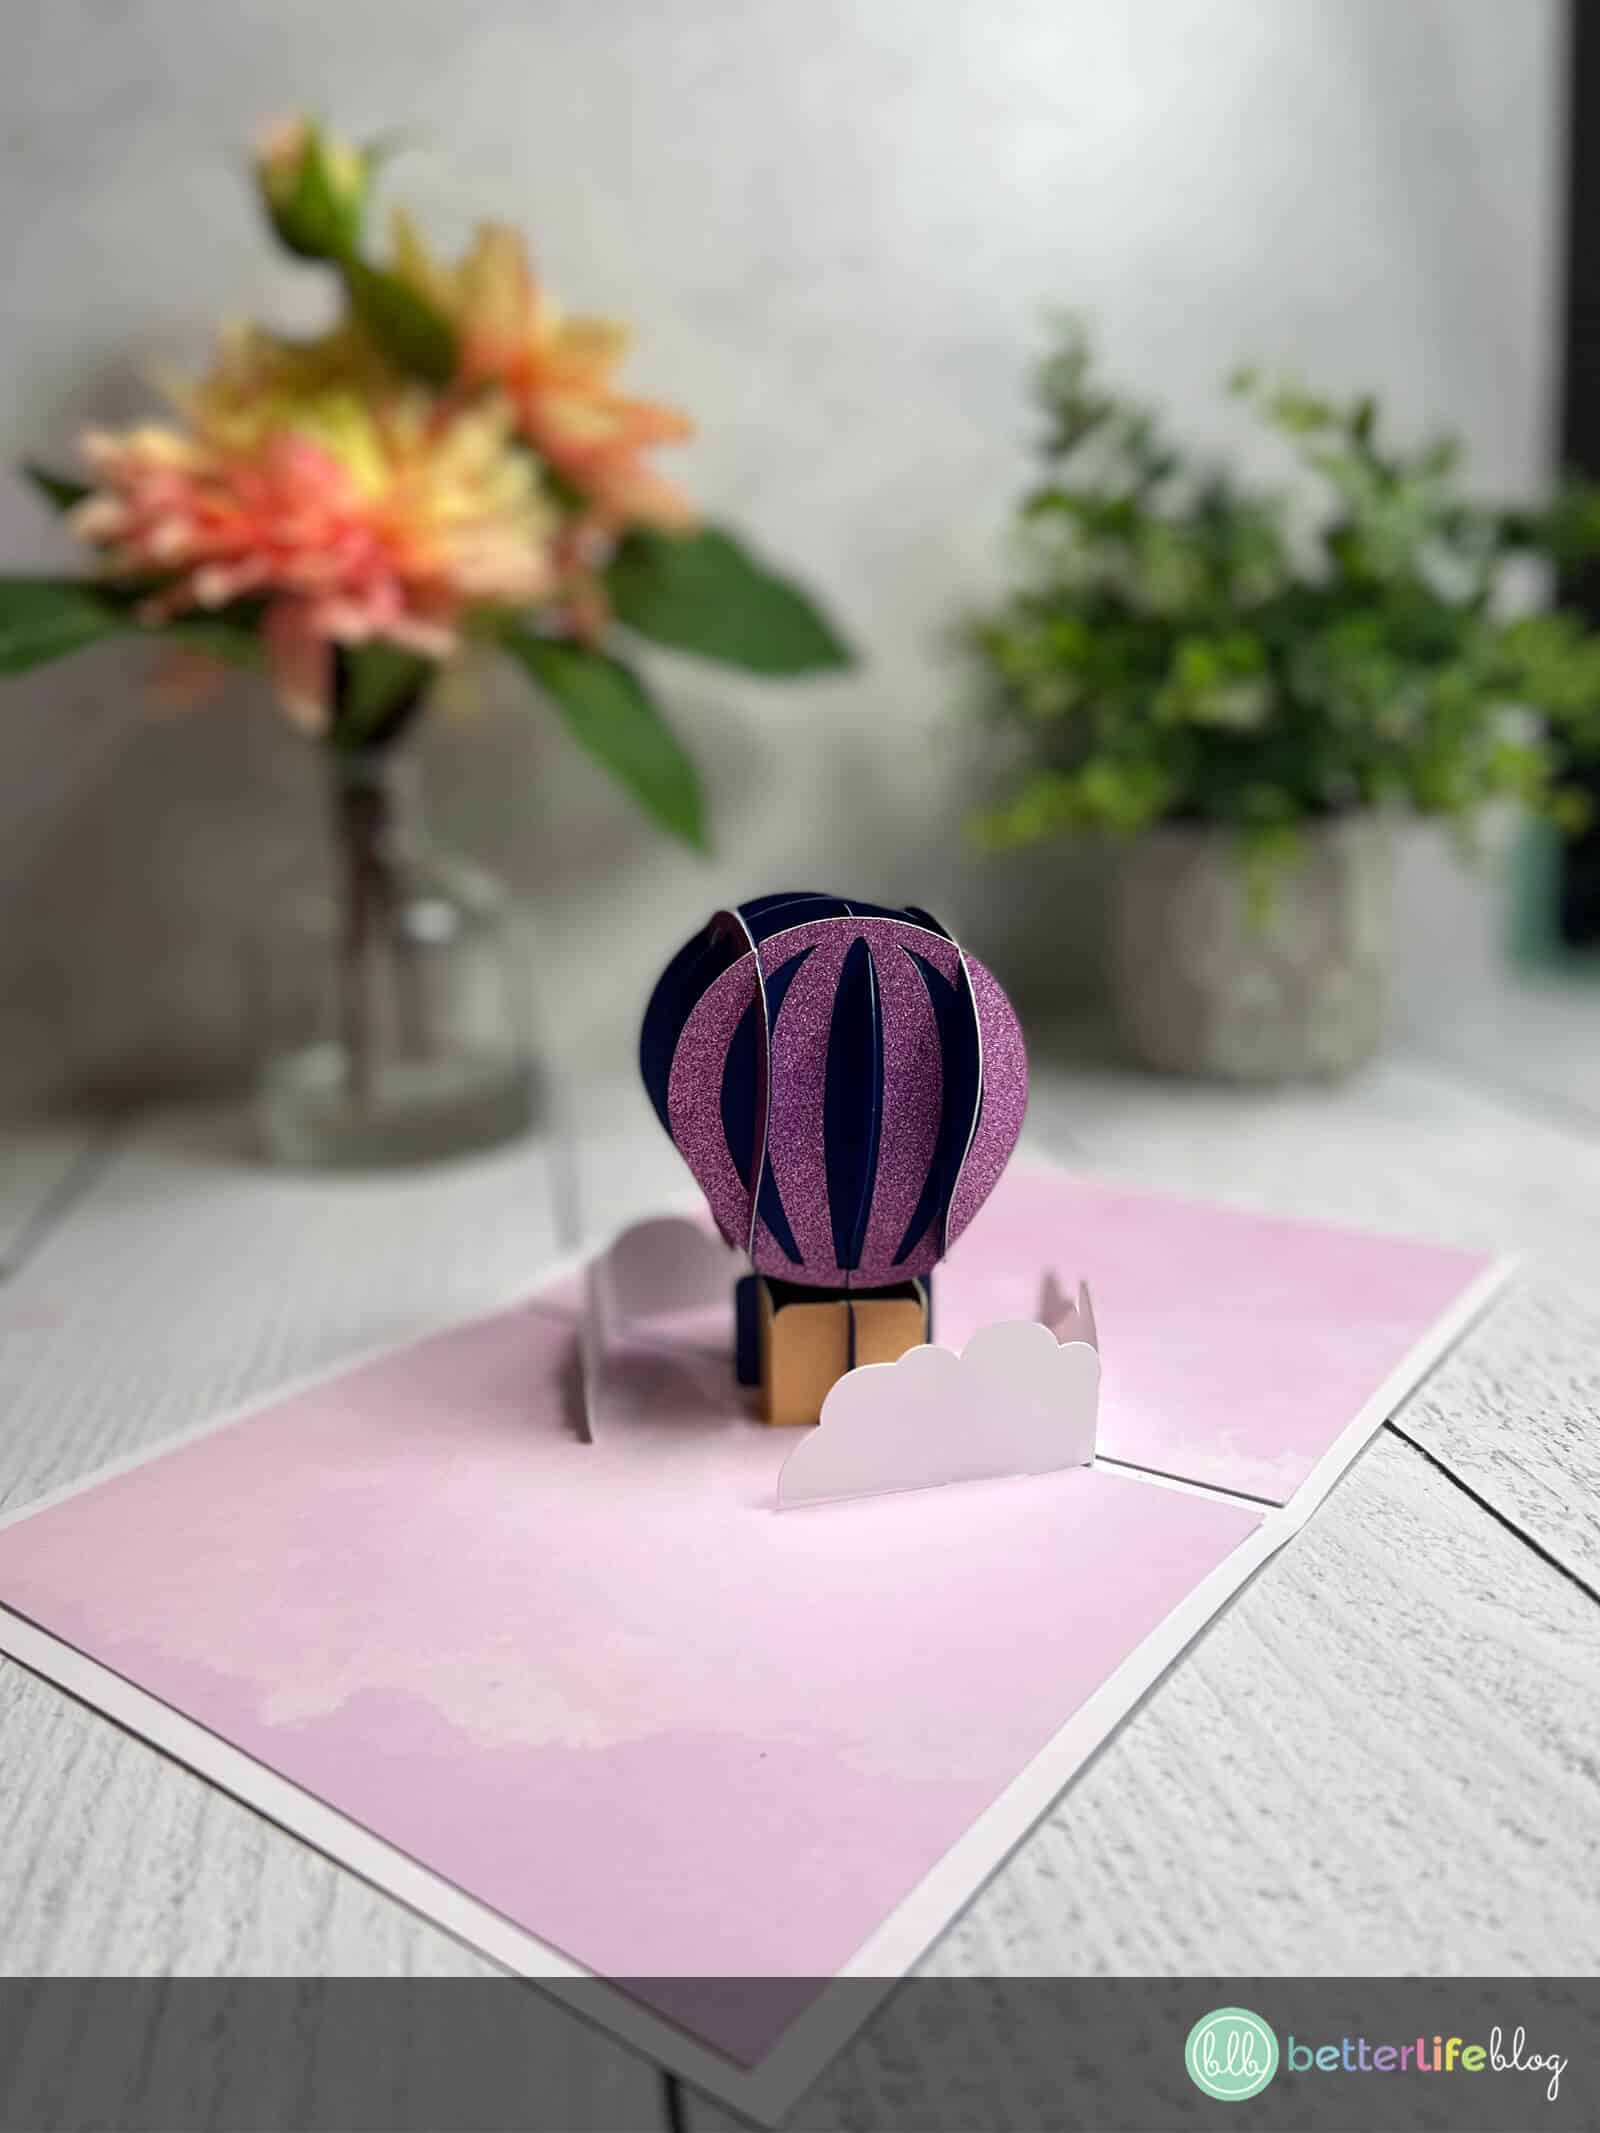 Want to learn how to make a pop-up card with your cutting machine? This Cricut Hot Air Balloon Pop-Up Card is an easy one to whip-up! Check out my full tutorial so you can make and customize one of your very own!